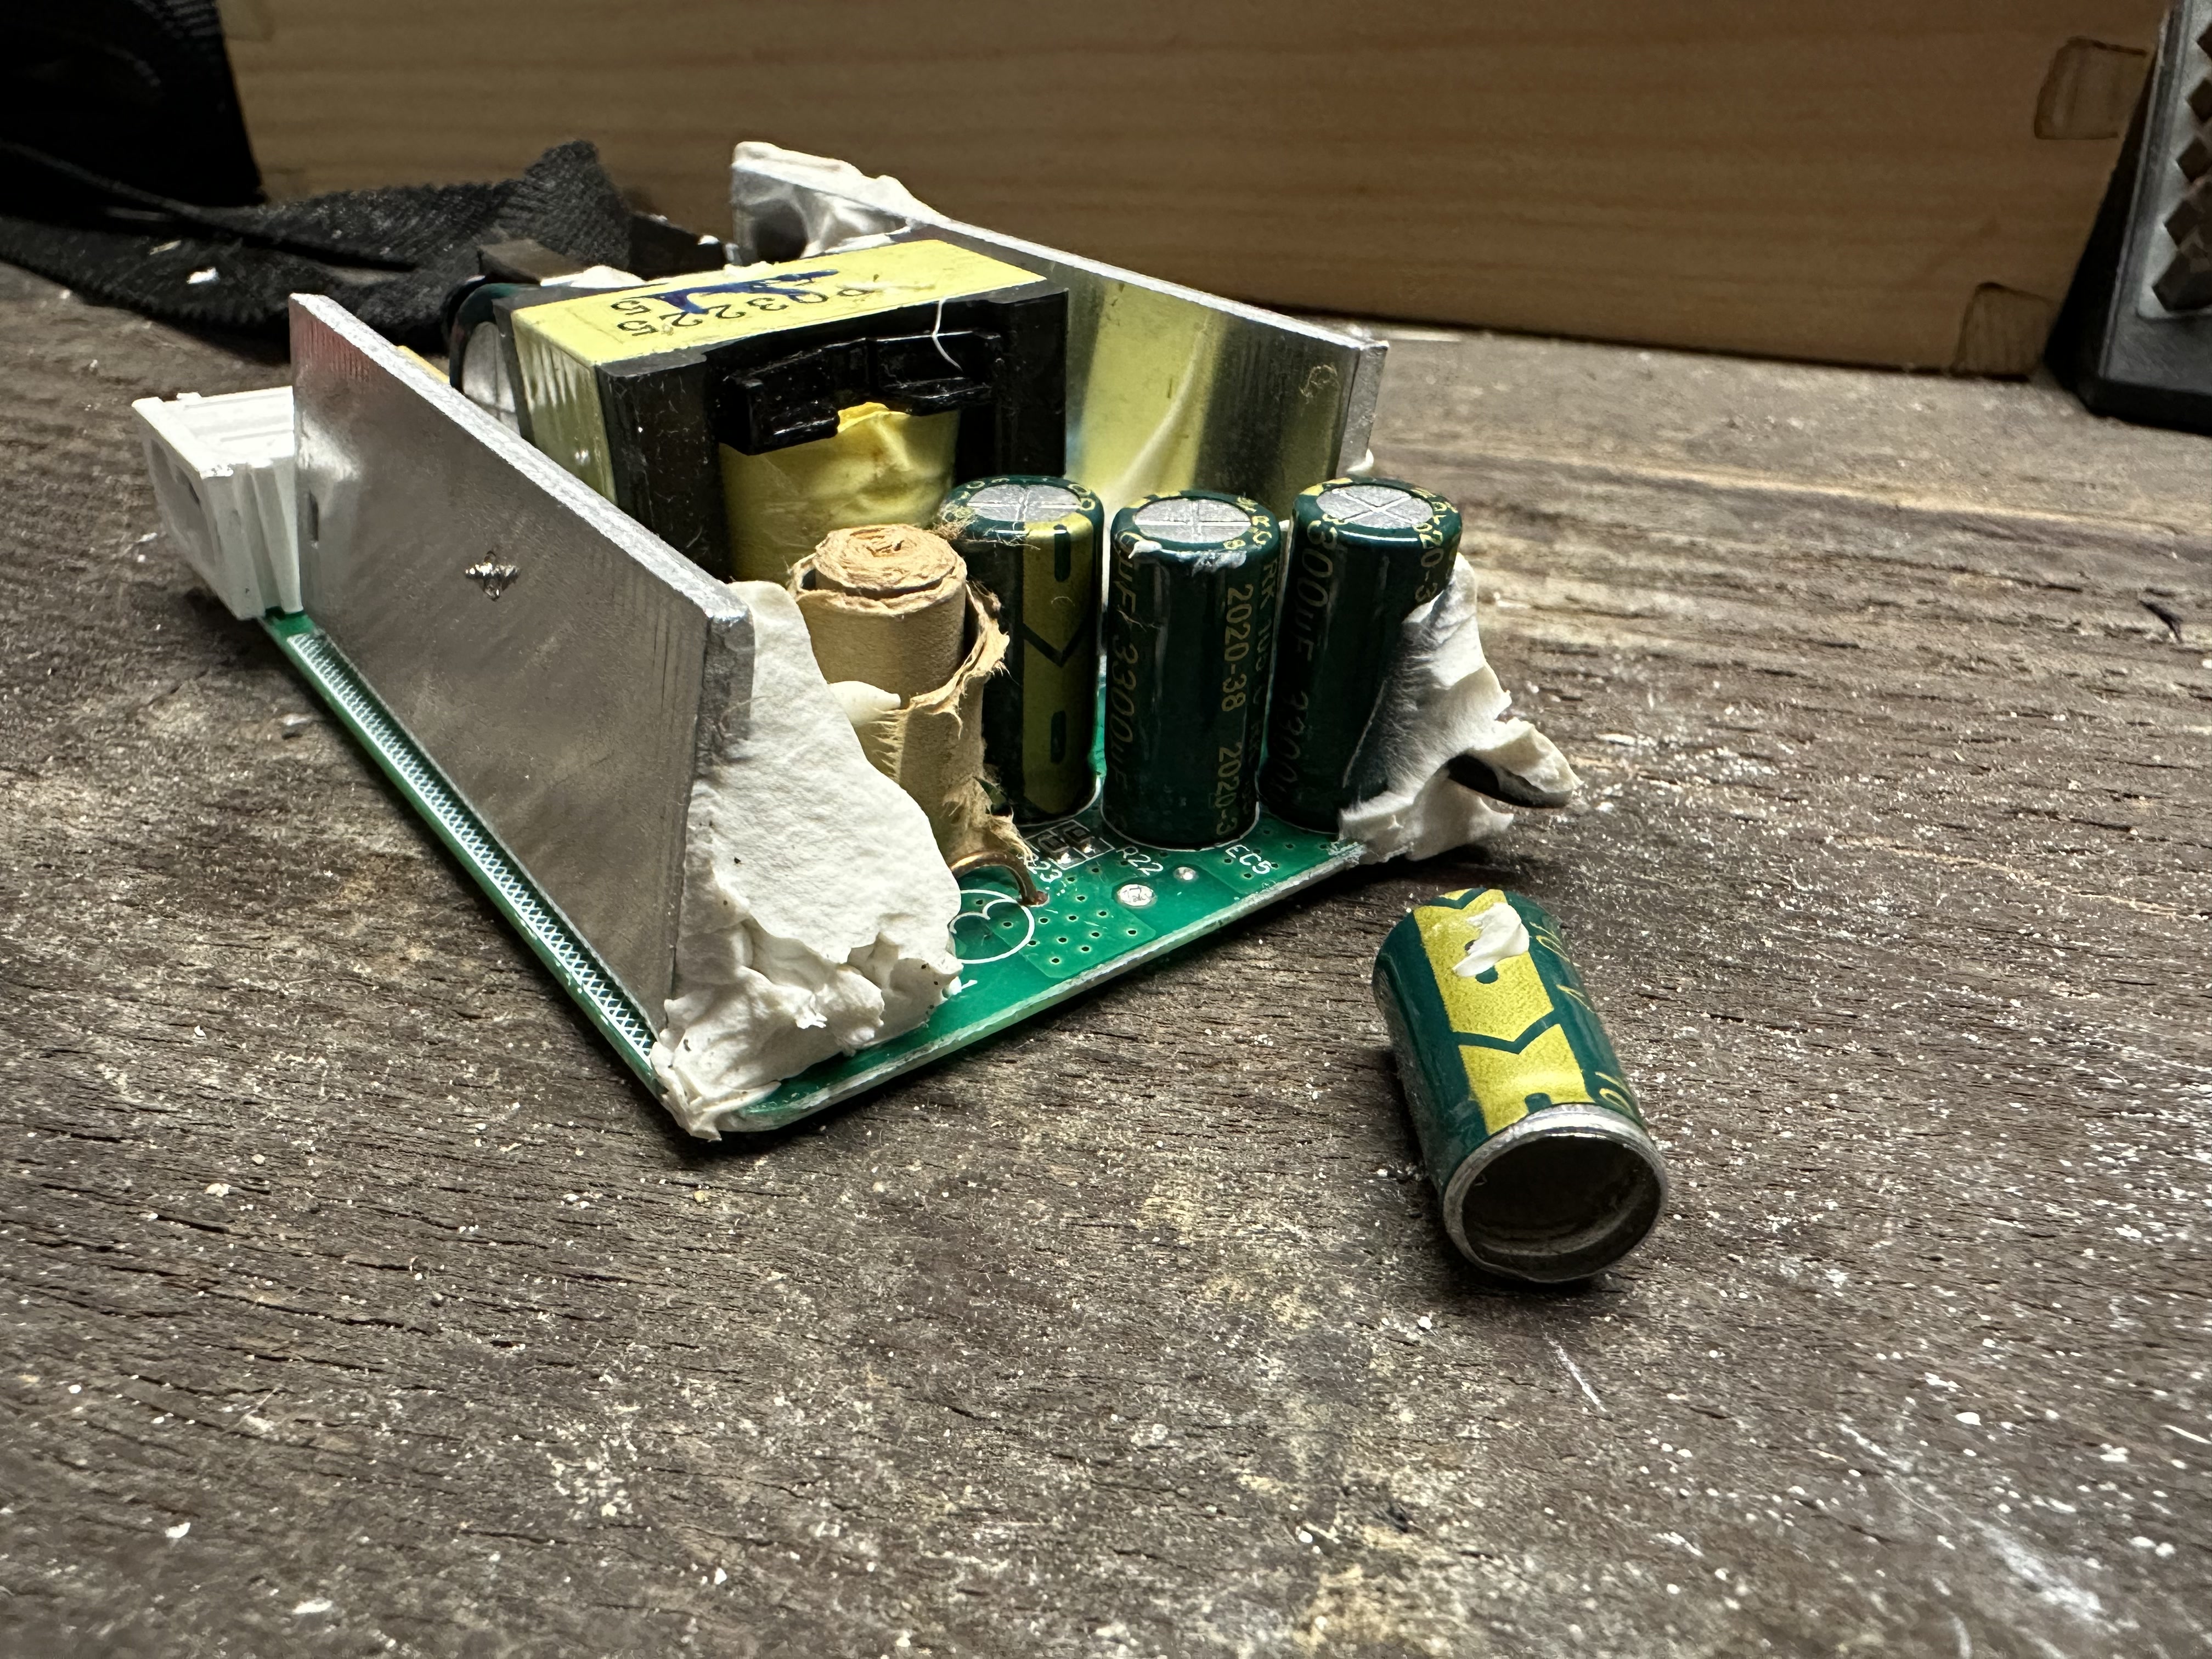 Catastrophic failure of a capacitor in the ASOMETECH ASX9